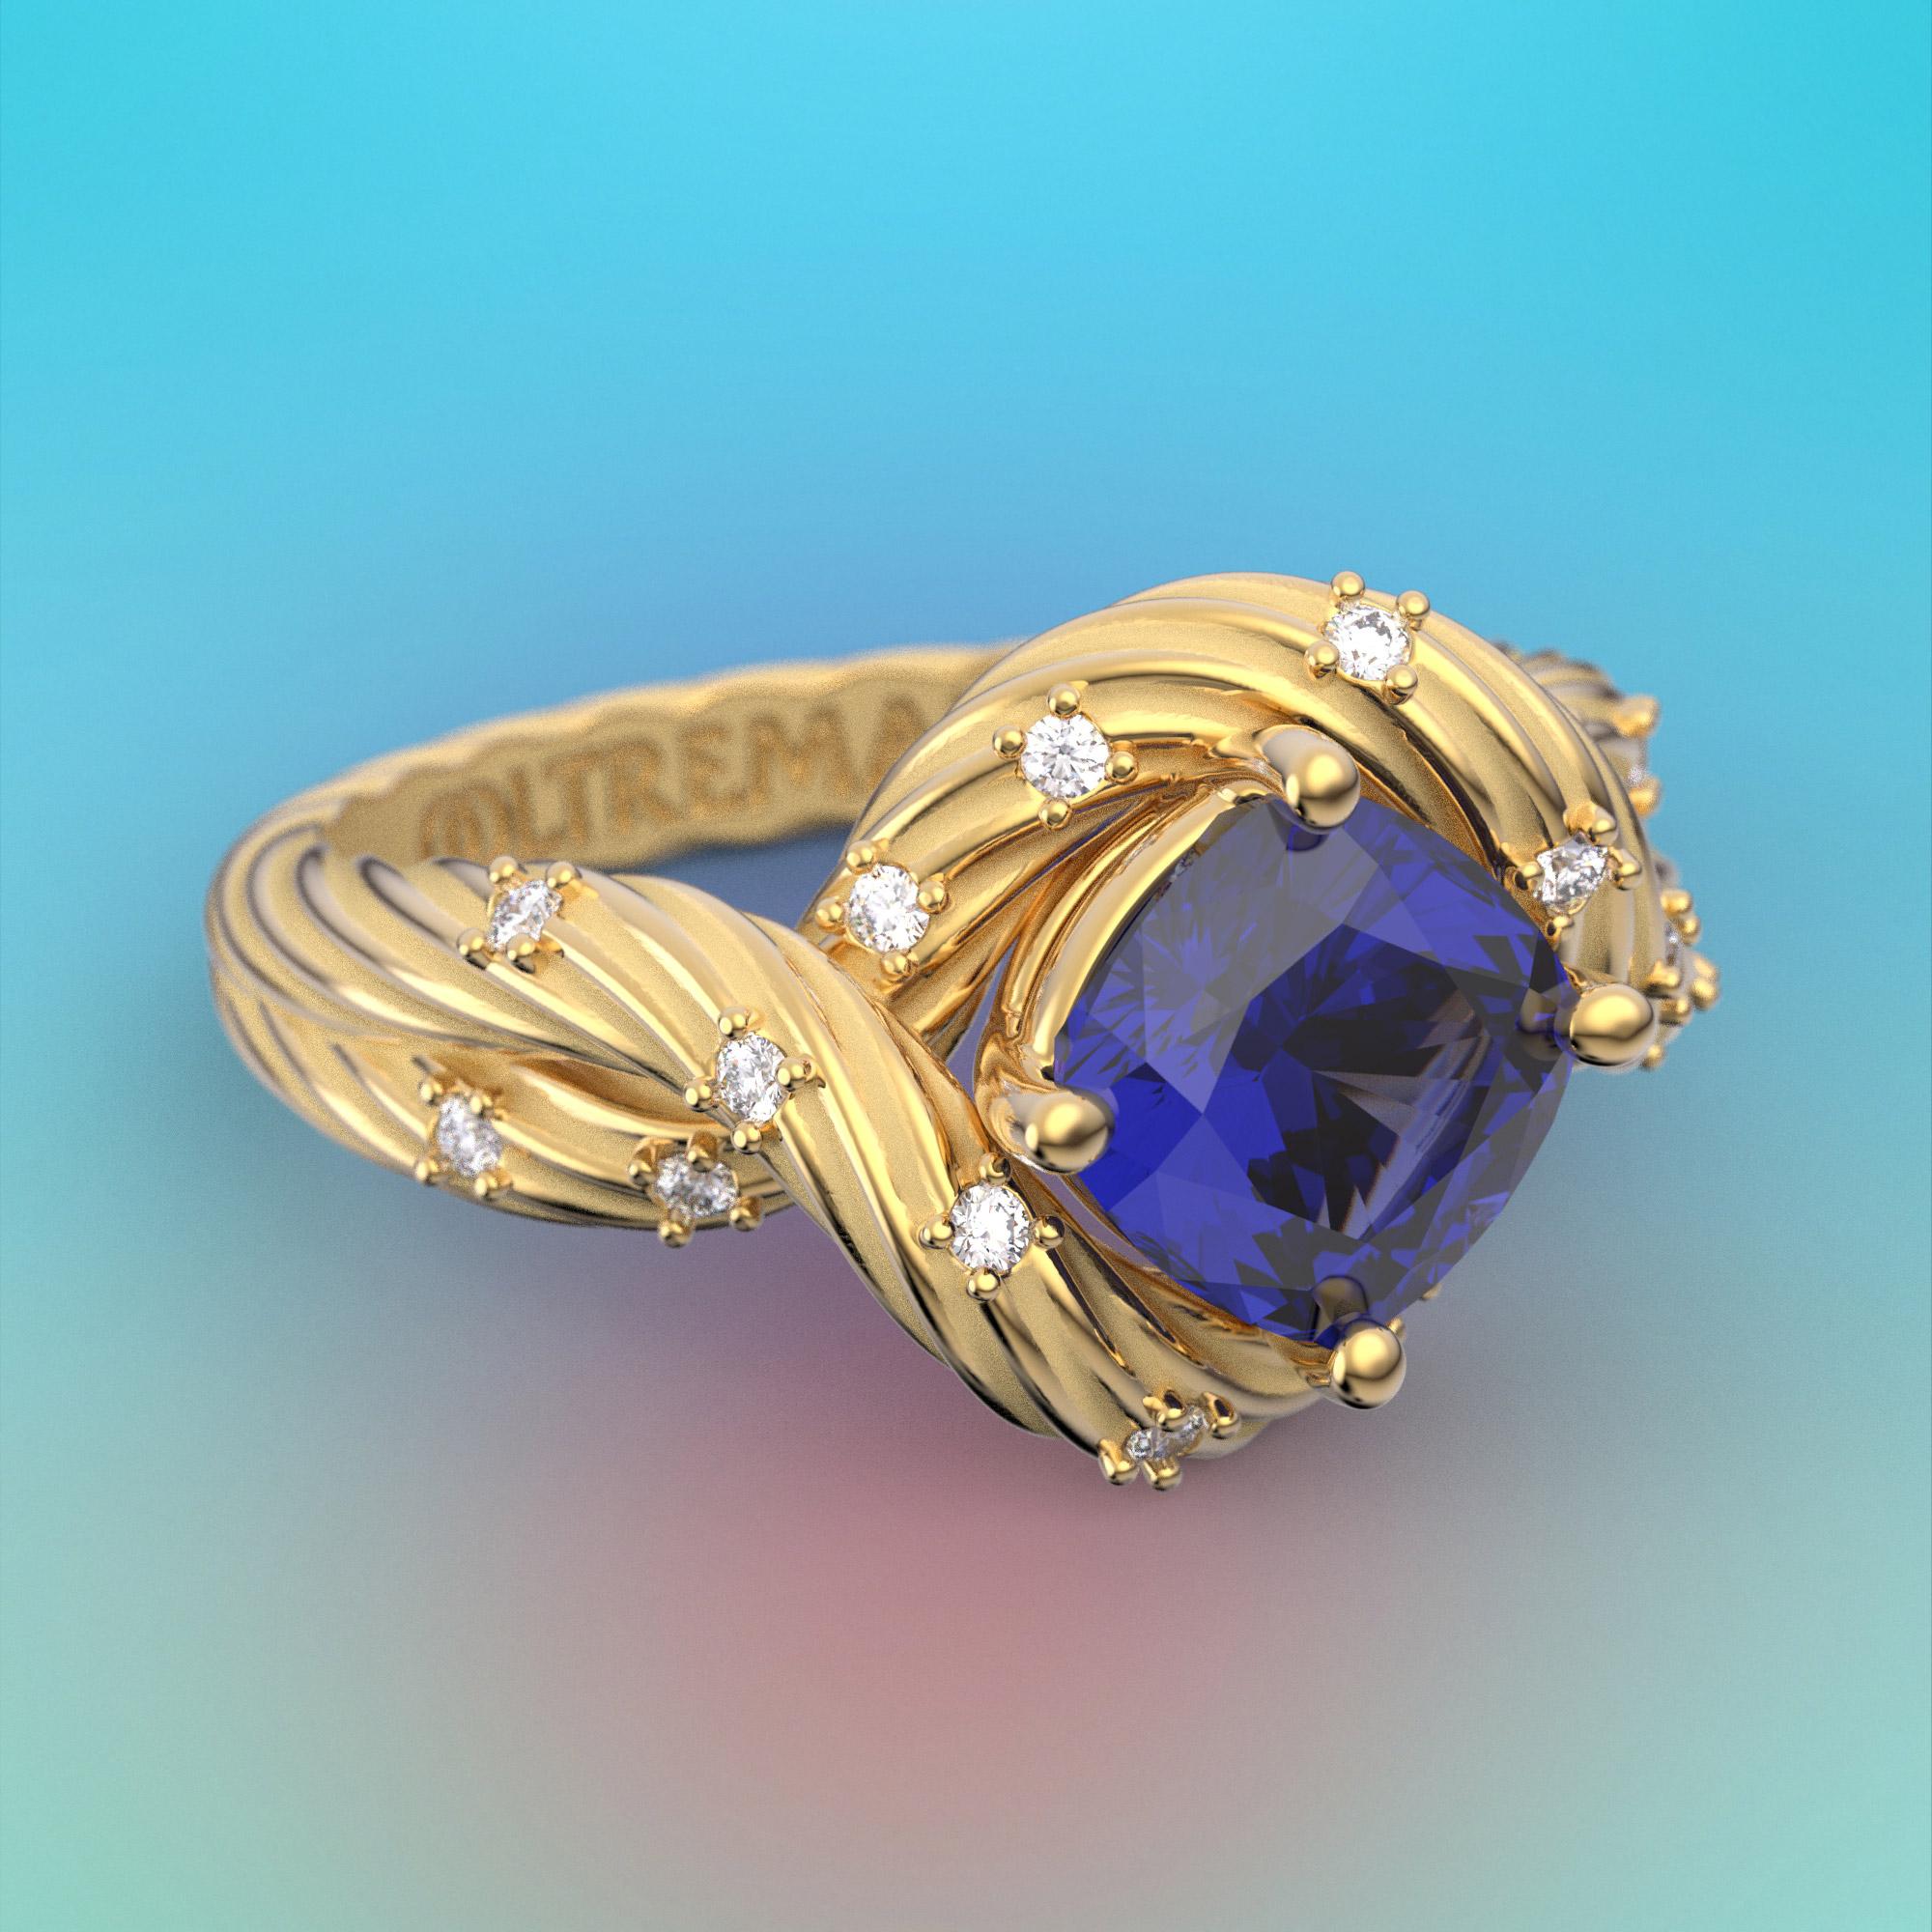 For Sale:  Tanzanite and Diamonds Ring 14k Solid Gold, Italian Fine Jewelry, made to order. 7